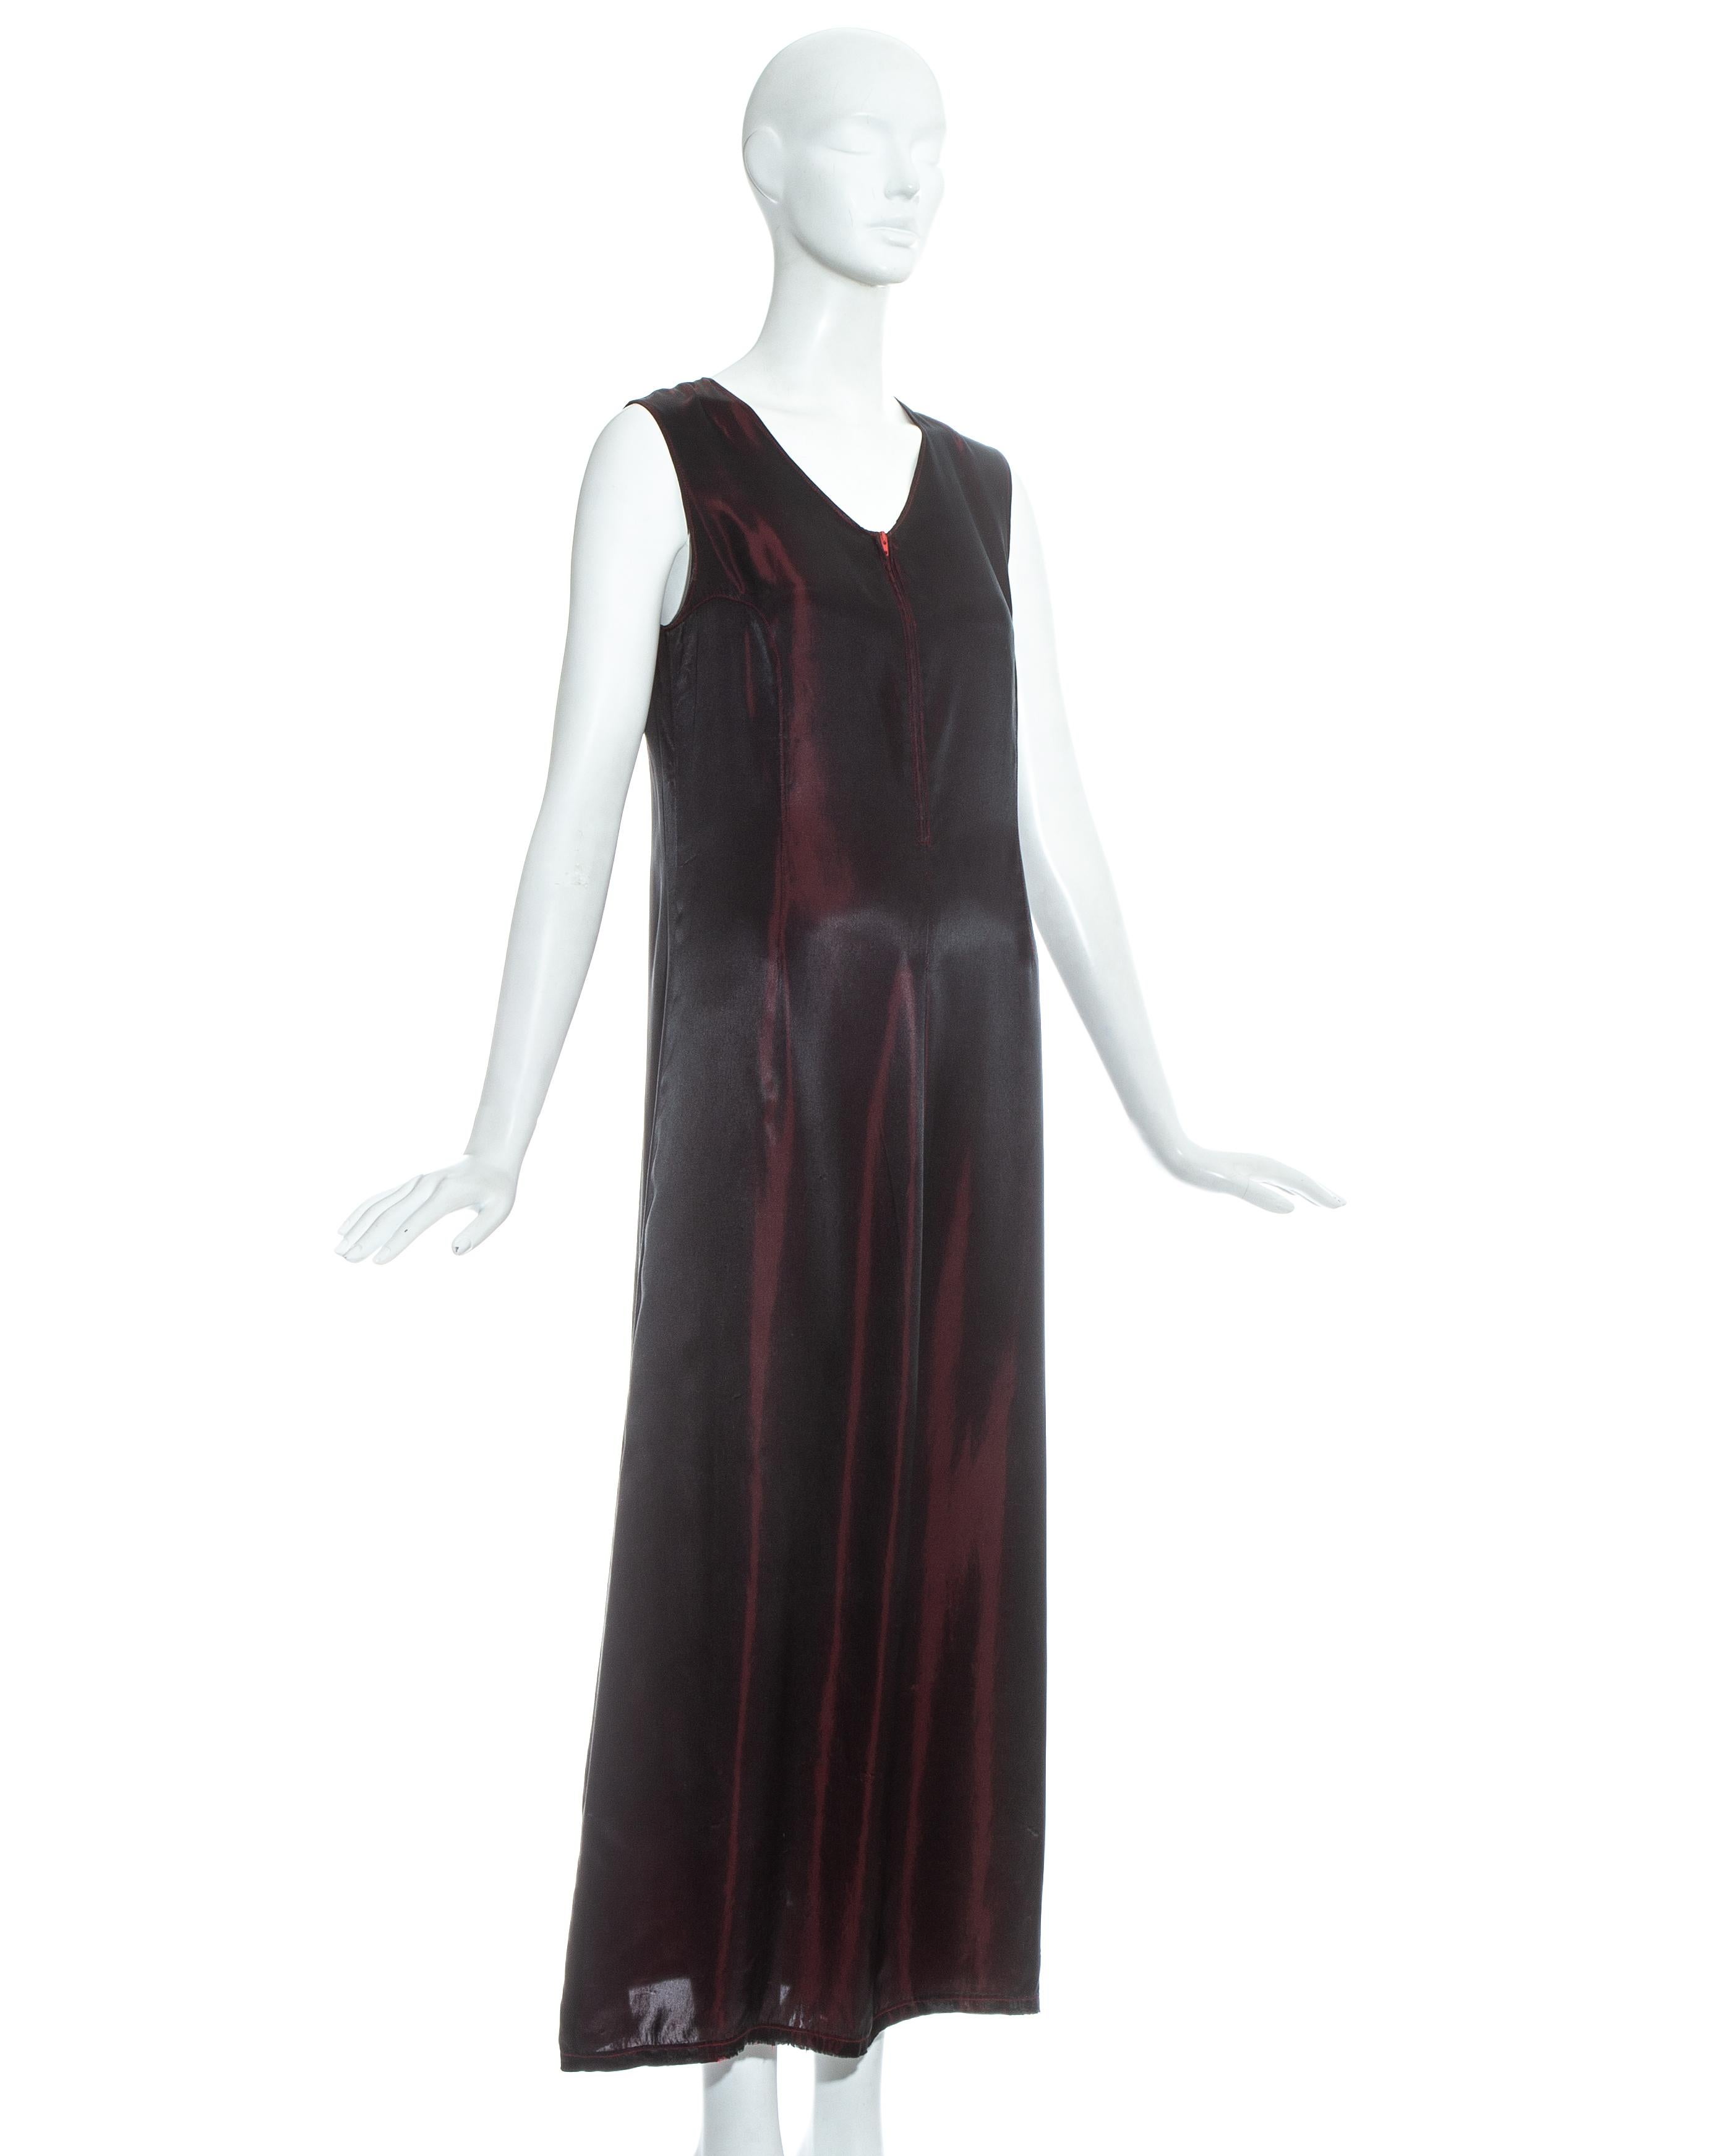 Martin Margiela; red and black iridescent rayon maxi slip dress. Zip fastening at centre front, darts at back neck, princess seams through bust points and intentional loose seam at mid centre back exposing wrong side of fabric.

Fall-Winter 1997